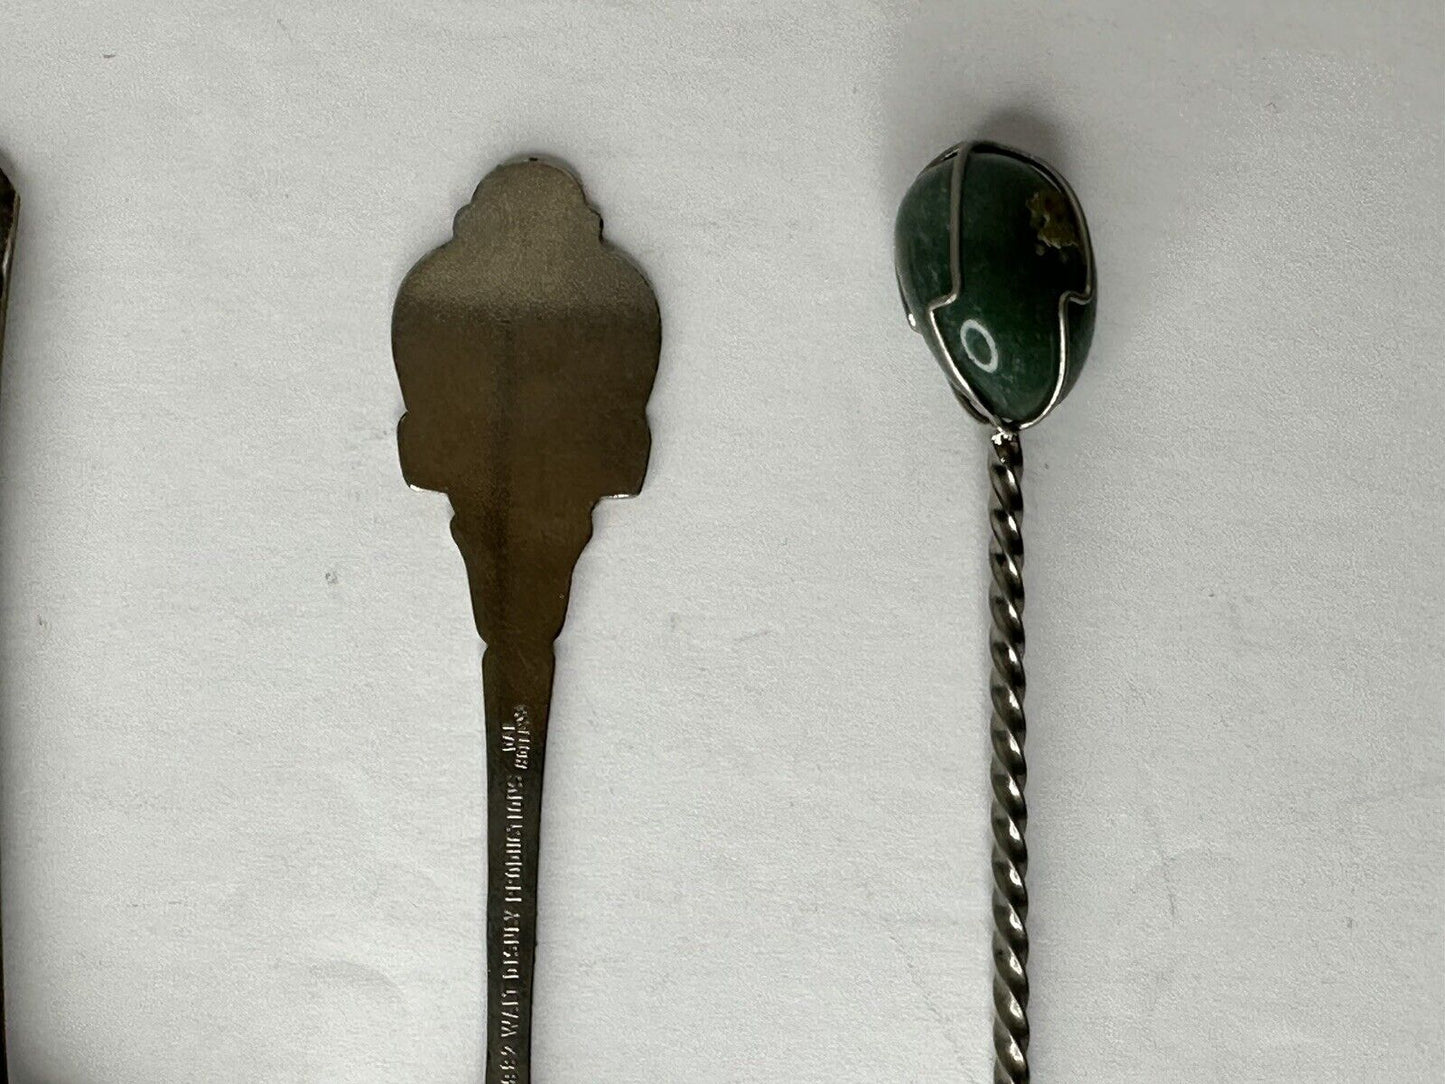 Exquisite Vintage Lot of 4 Collectible Spoons – 1847 Rogers Bros Fork, Disney Mayell England Souvenir, and Gemstone Ladle - TreasuTiques